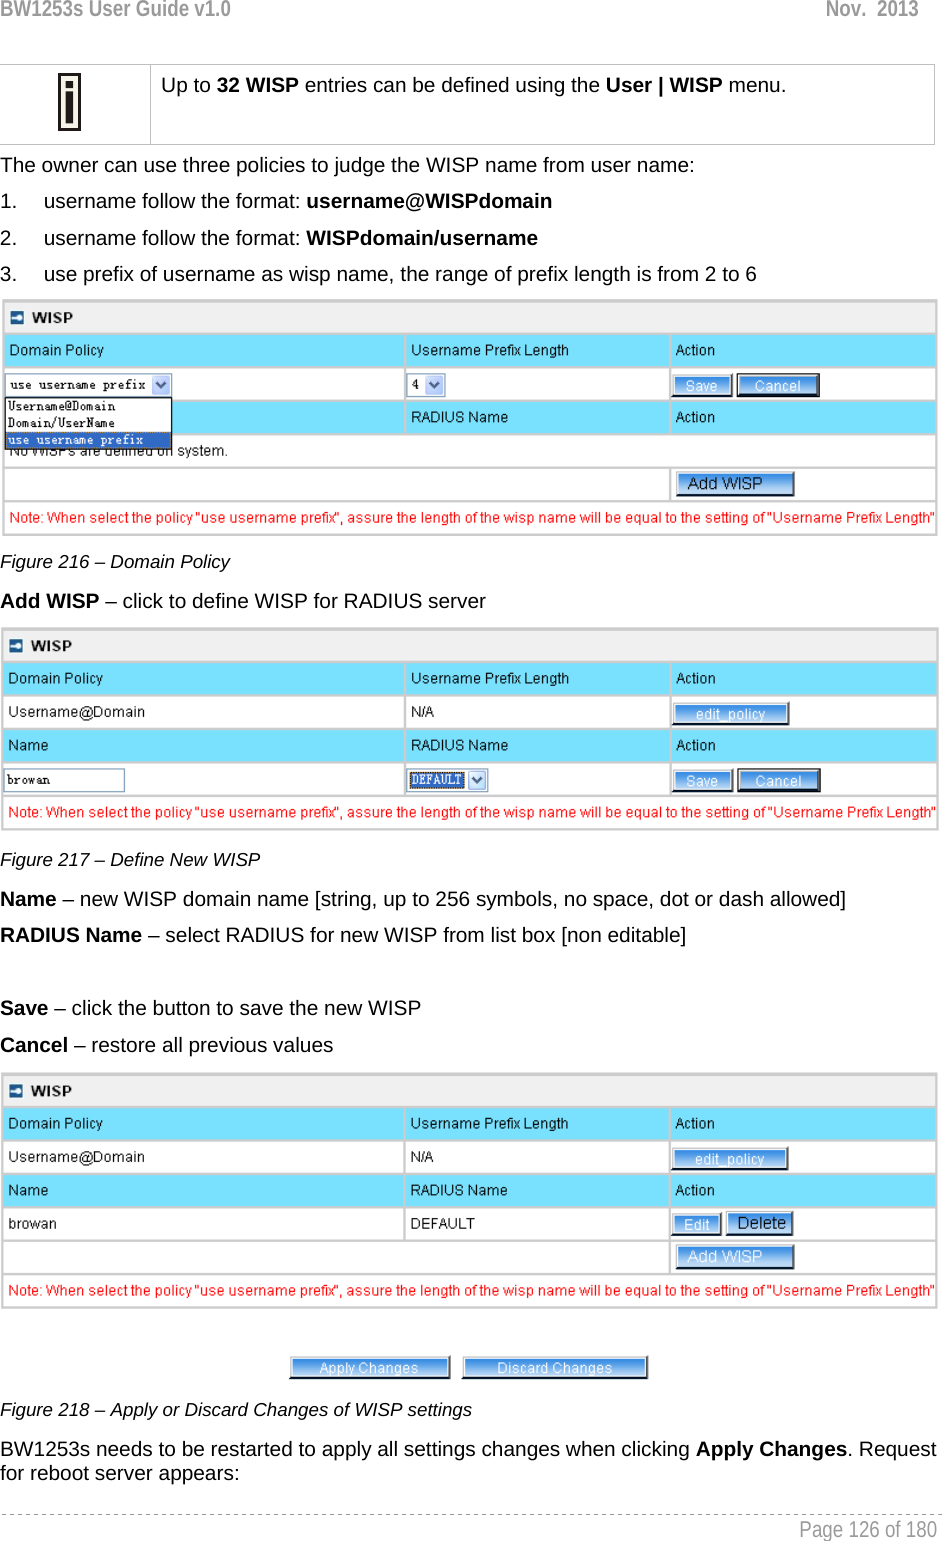 BW1253s User Guide v1.0  Nov.  2013     Page 126 of 180    Up to 32 WISP entries can be defined using the User | WISP menu. The owner can use three policies to judge the WISP name from user name: 1.  username follow the format: username@WISPdomain 2.  username follow the format: WISPdomain/username 3.  use prefix of username as wisp name, the range of prefix length is from 2 to 6  Figure 216 – Domain Policy Add WISP – click to define WISP for RADIUS server  Figure 217 – Define New WISP Name – new WISP domain name [string, up to 256 symbols, no space, dot or dash allowed] RADIUS Name – select RADIUS for new WISP from list box [non editable]  Save – click the button to save the new WISP Cancel – restore all previous values  Figure 218 – Apply or Discard Changes of WISP settings BW1253s needs to be restarted to apply all settings changes when clicking Apply Changes. Request for reboot server appears: 